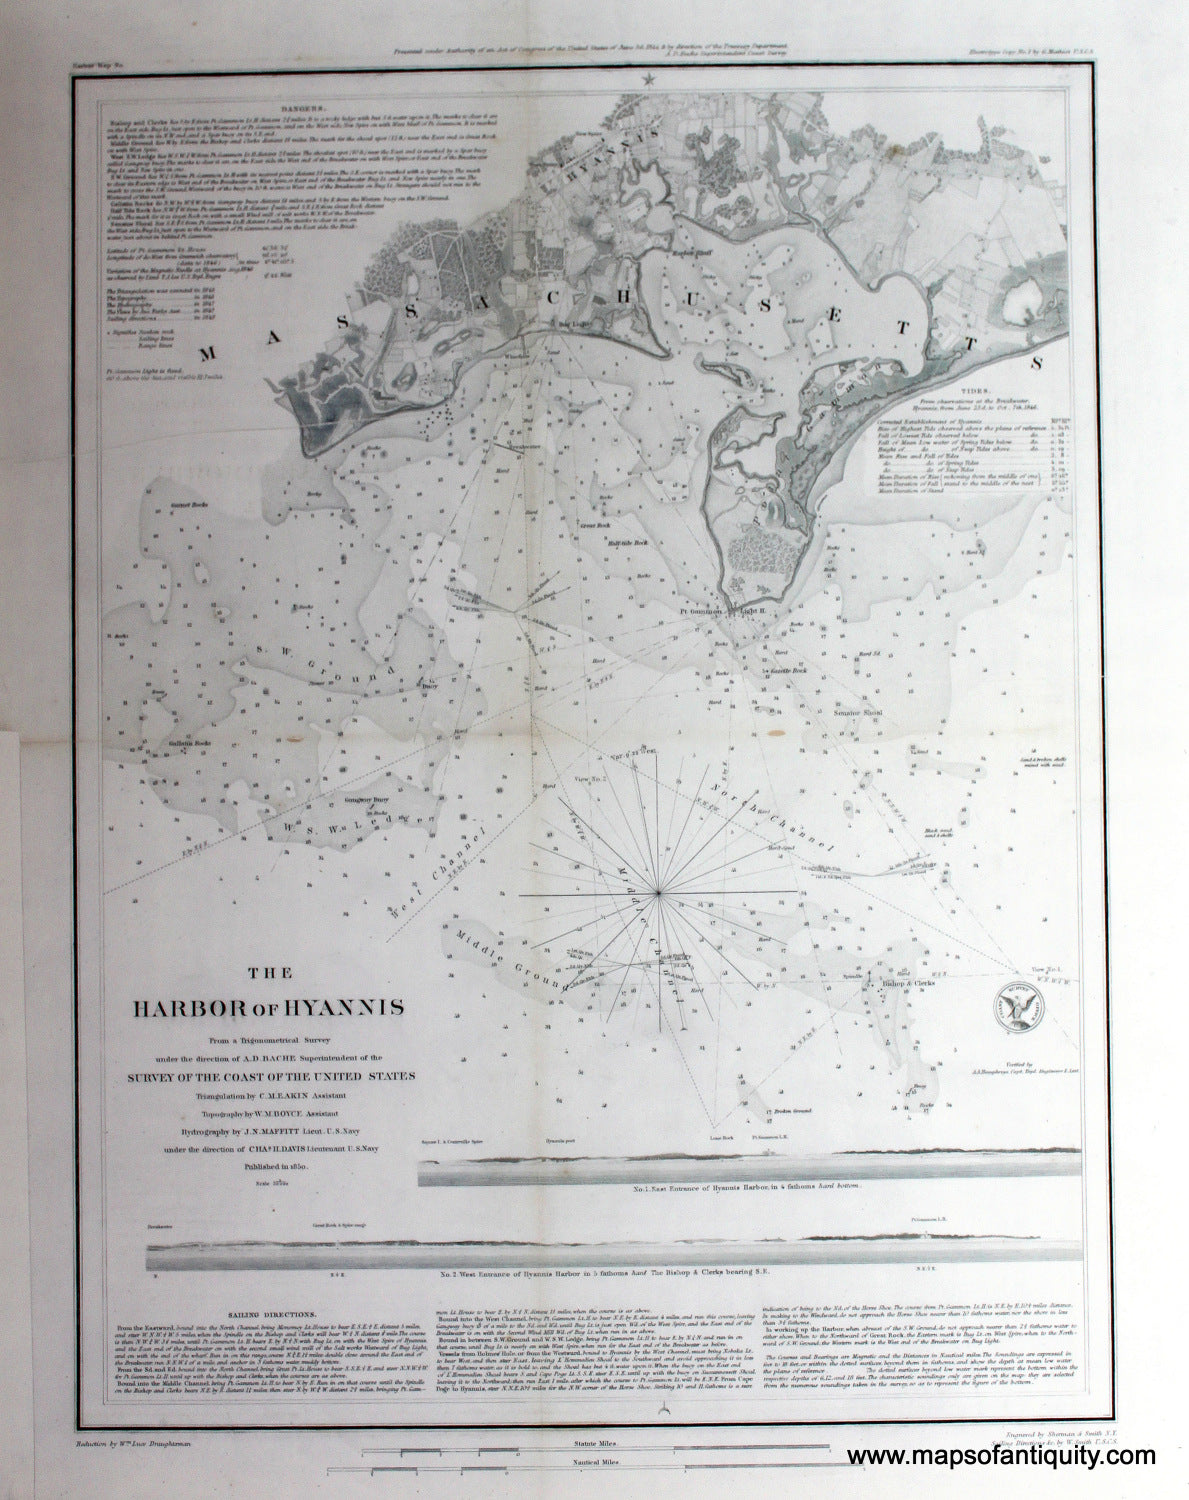 Reproduction-The-Harbor-of-Hyannis---Reproduction---Reproduction-Cape-Cod-and-Islands---U.S.-Coast-Survey-Maps-Of-Antiquity